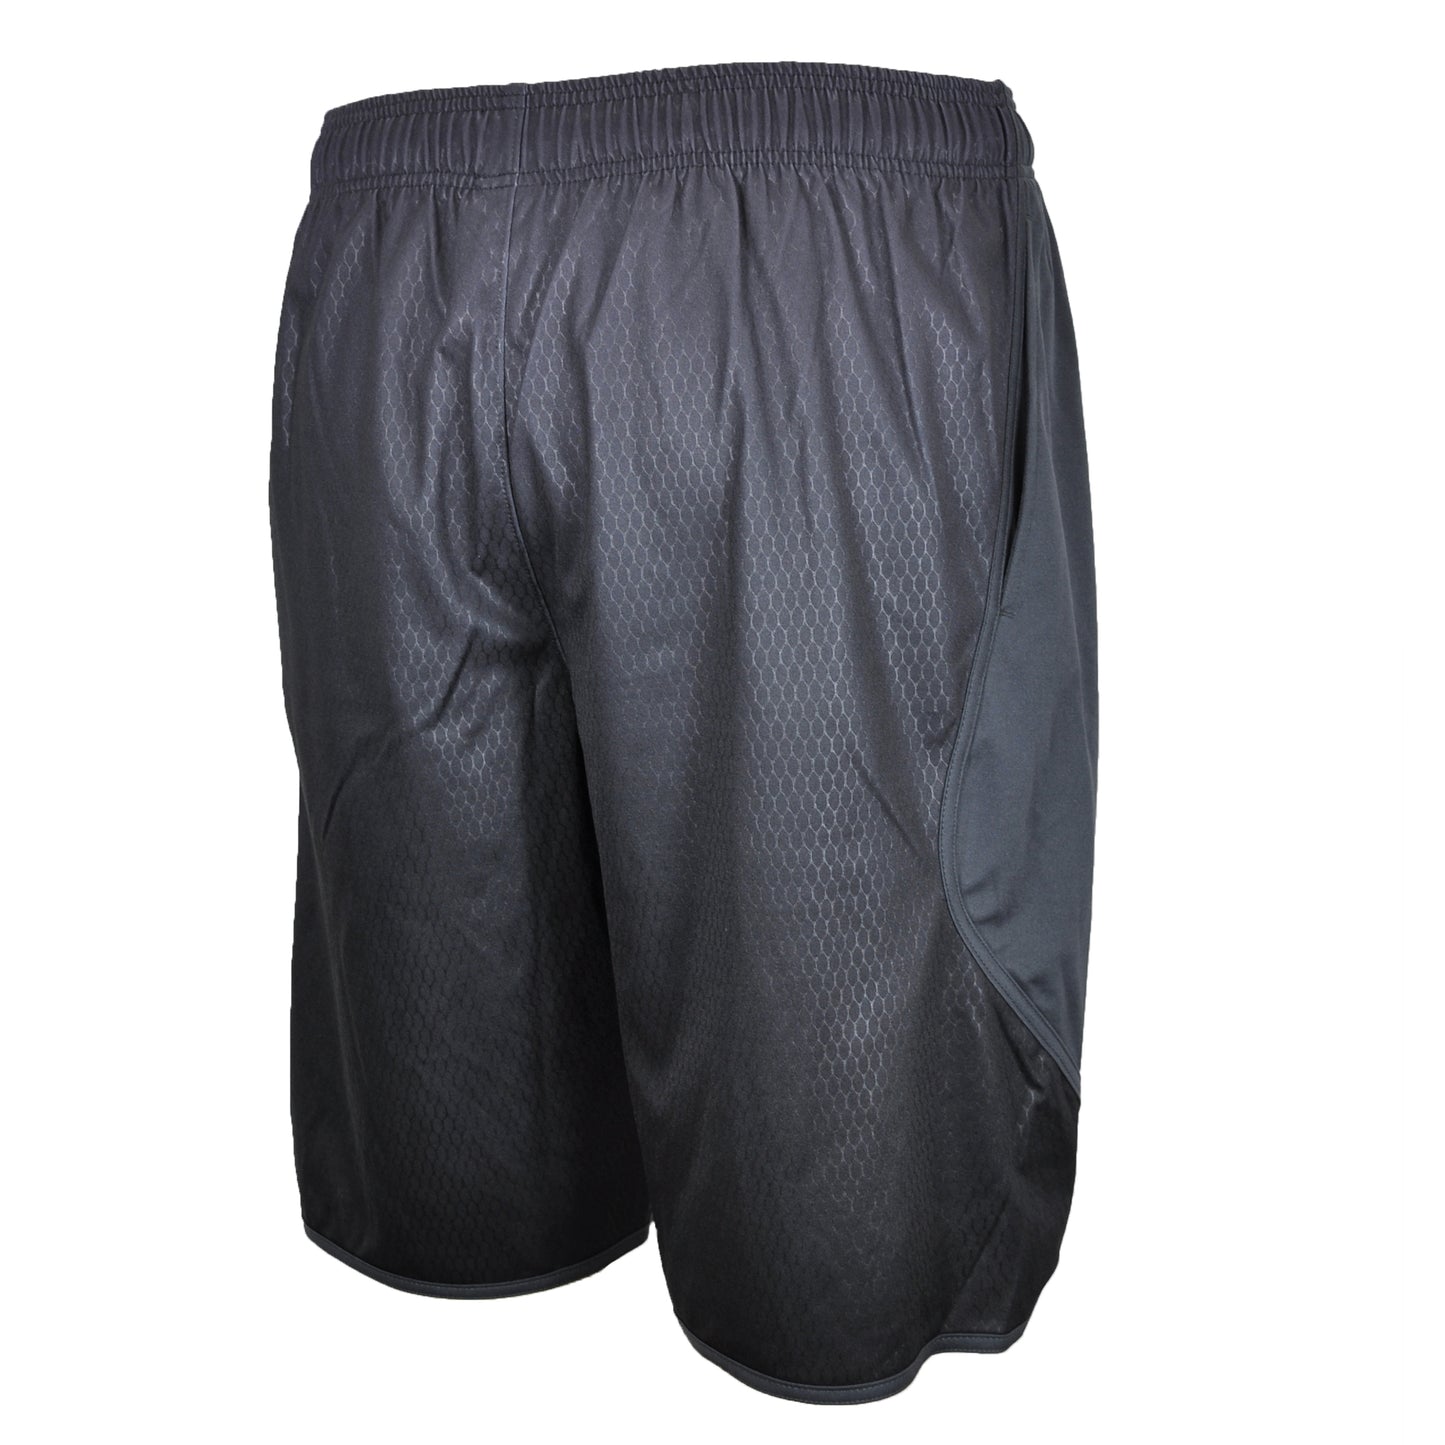 Young USA® Men's Fitness Shorts